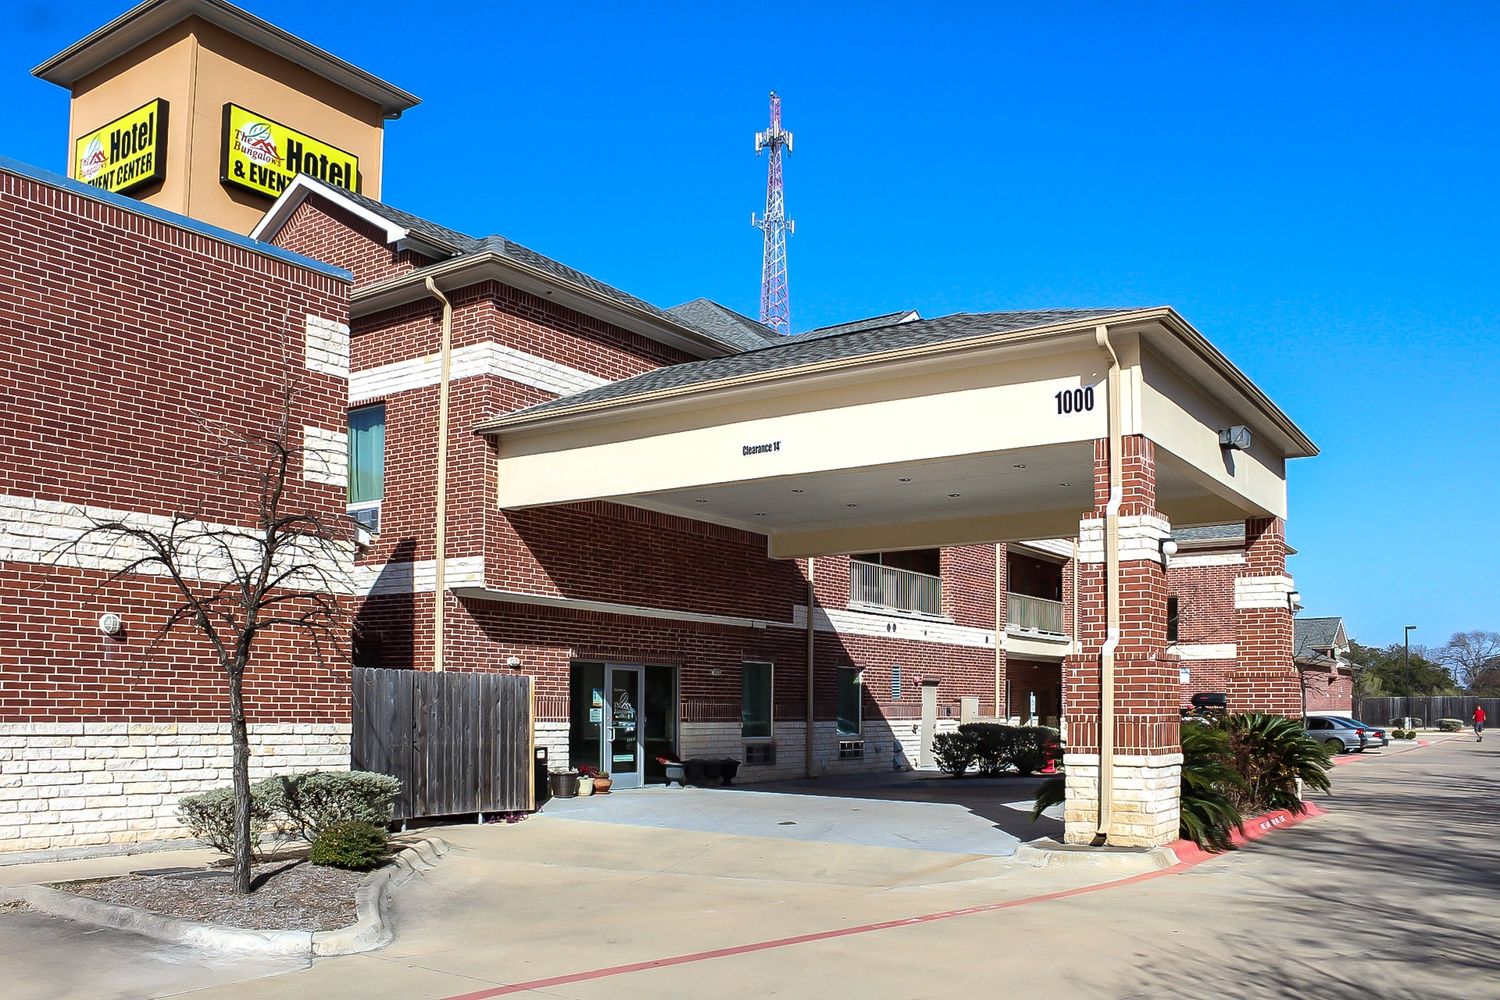 Welcome to the Bungalows Hotel & Event Center in Cedar Park, Texas